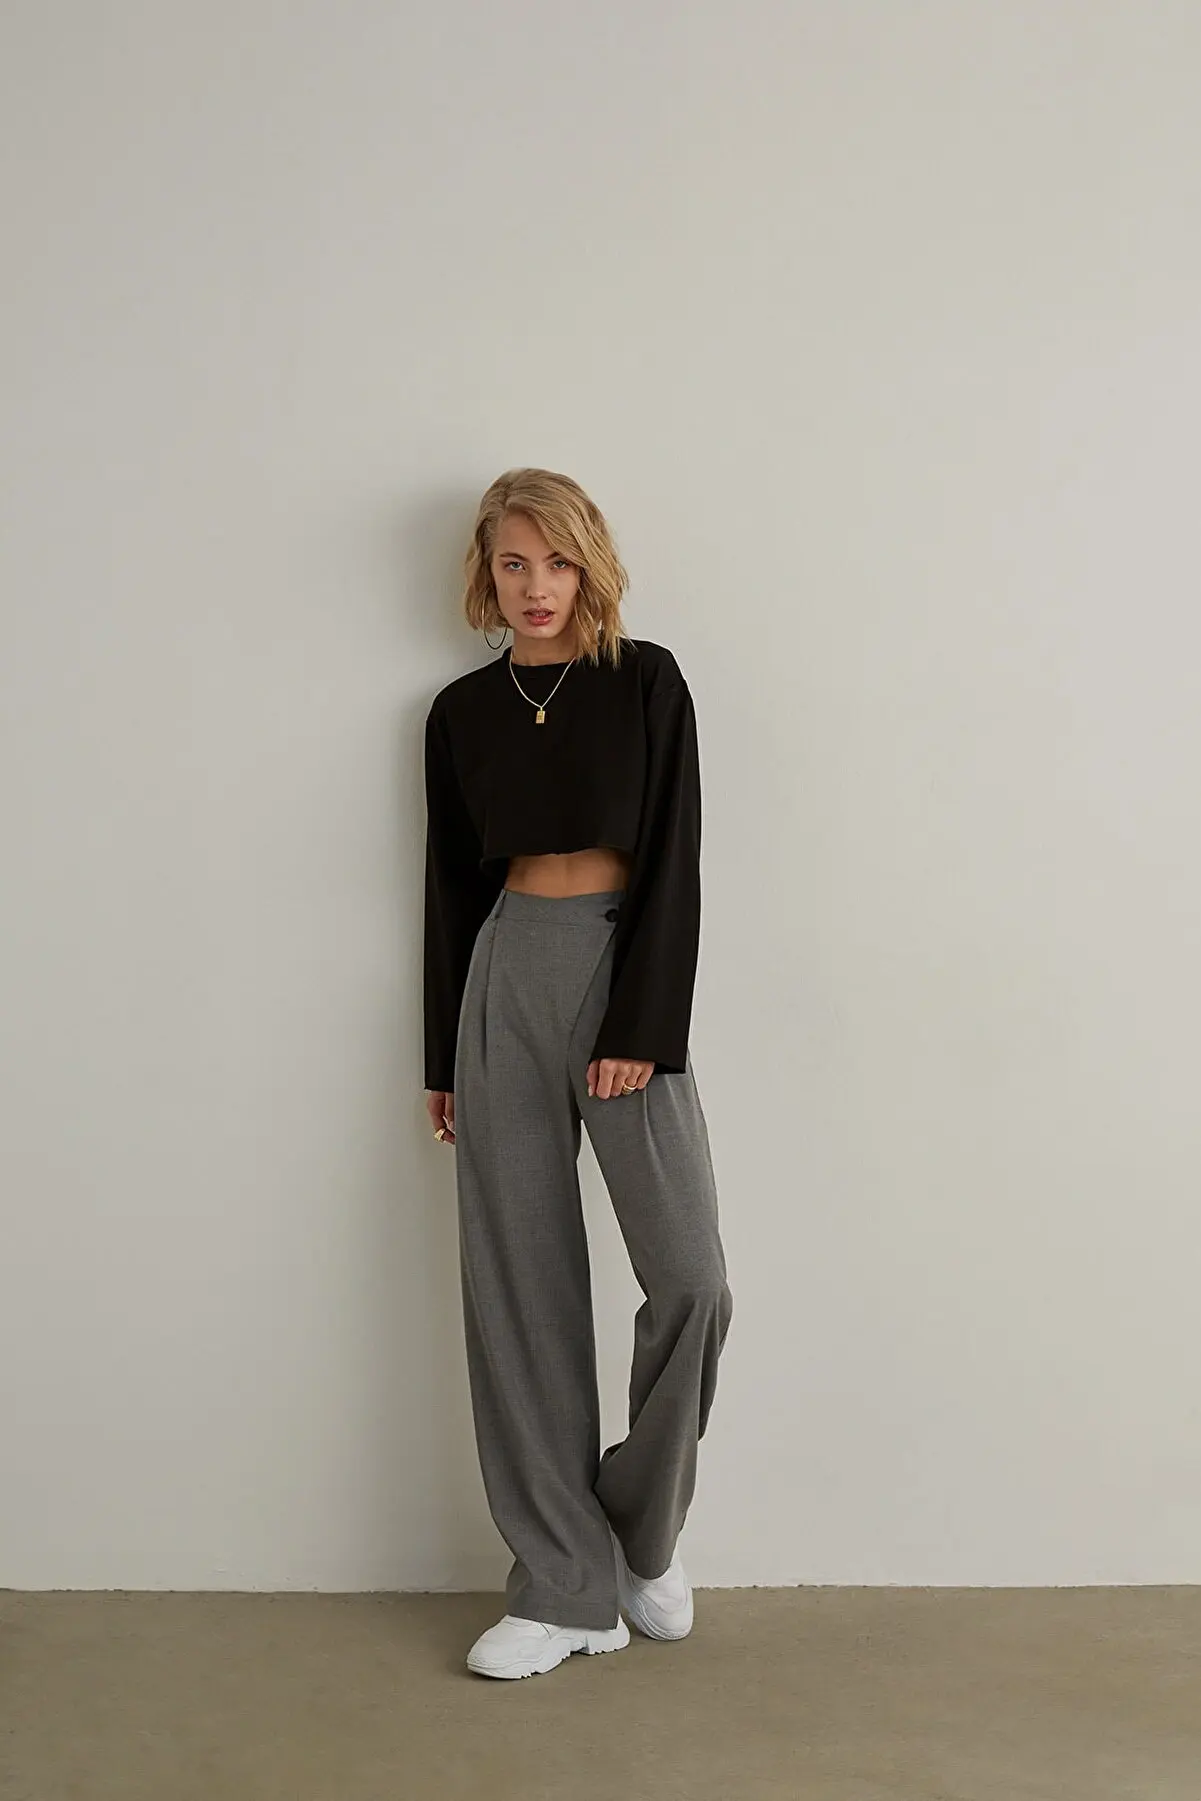 GoldFashion Black and Gray High Waist Trousers 2022 New Product Fashion Capri Clothing Stylish Design Loose Casual Cloth Cargo